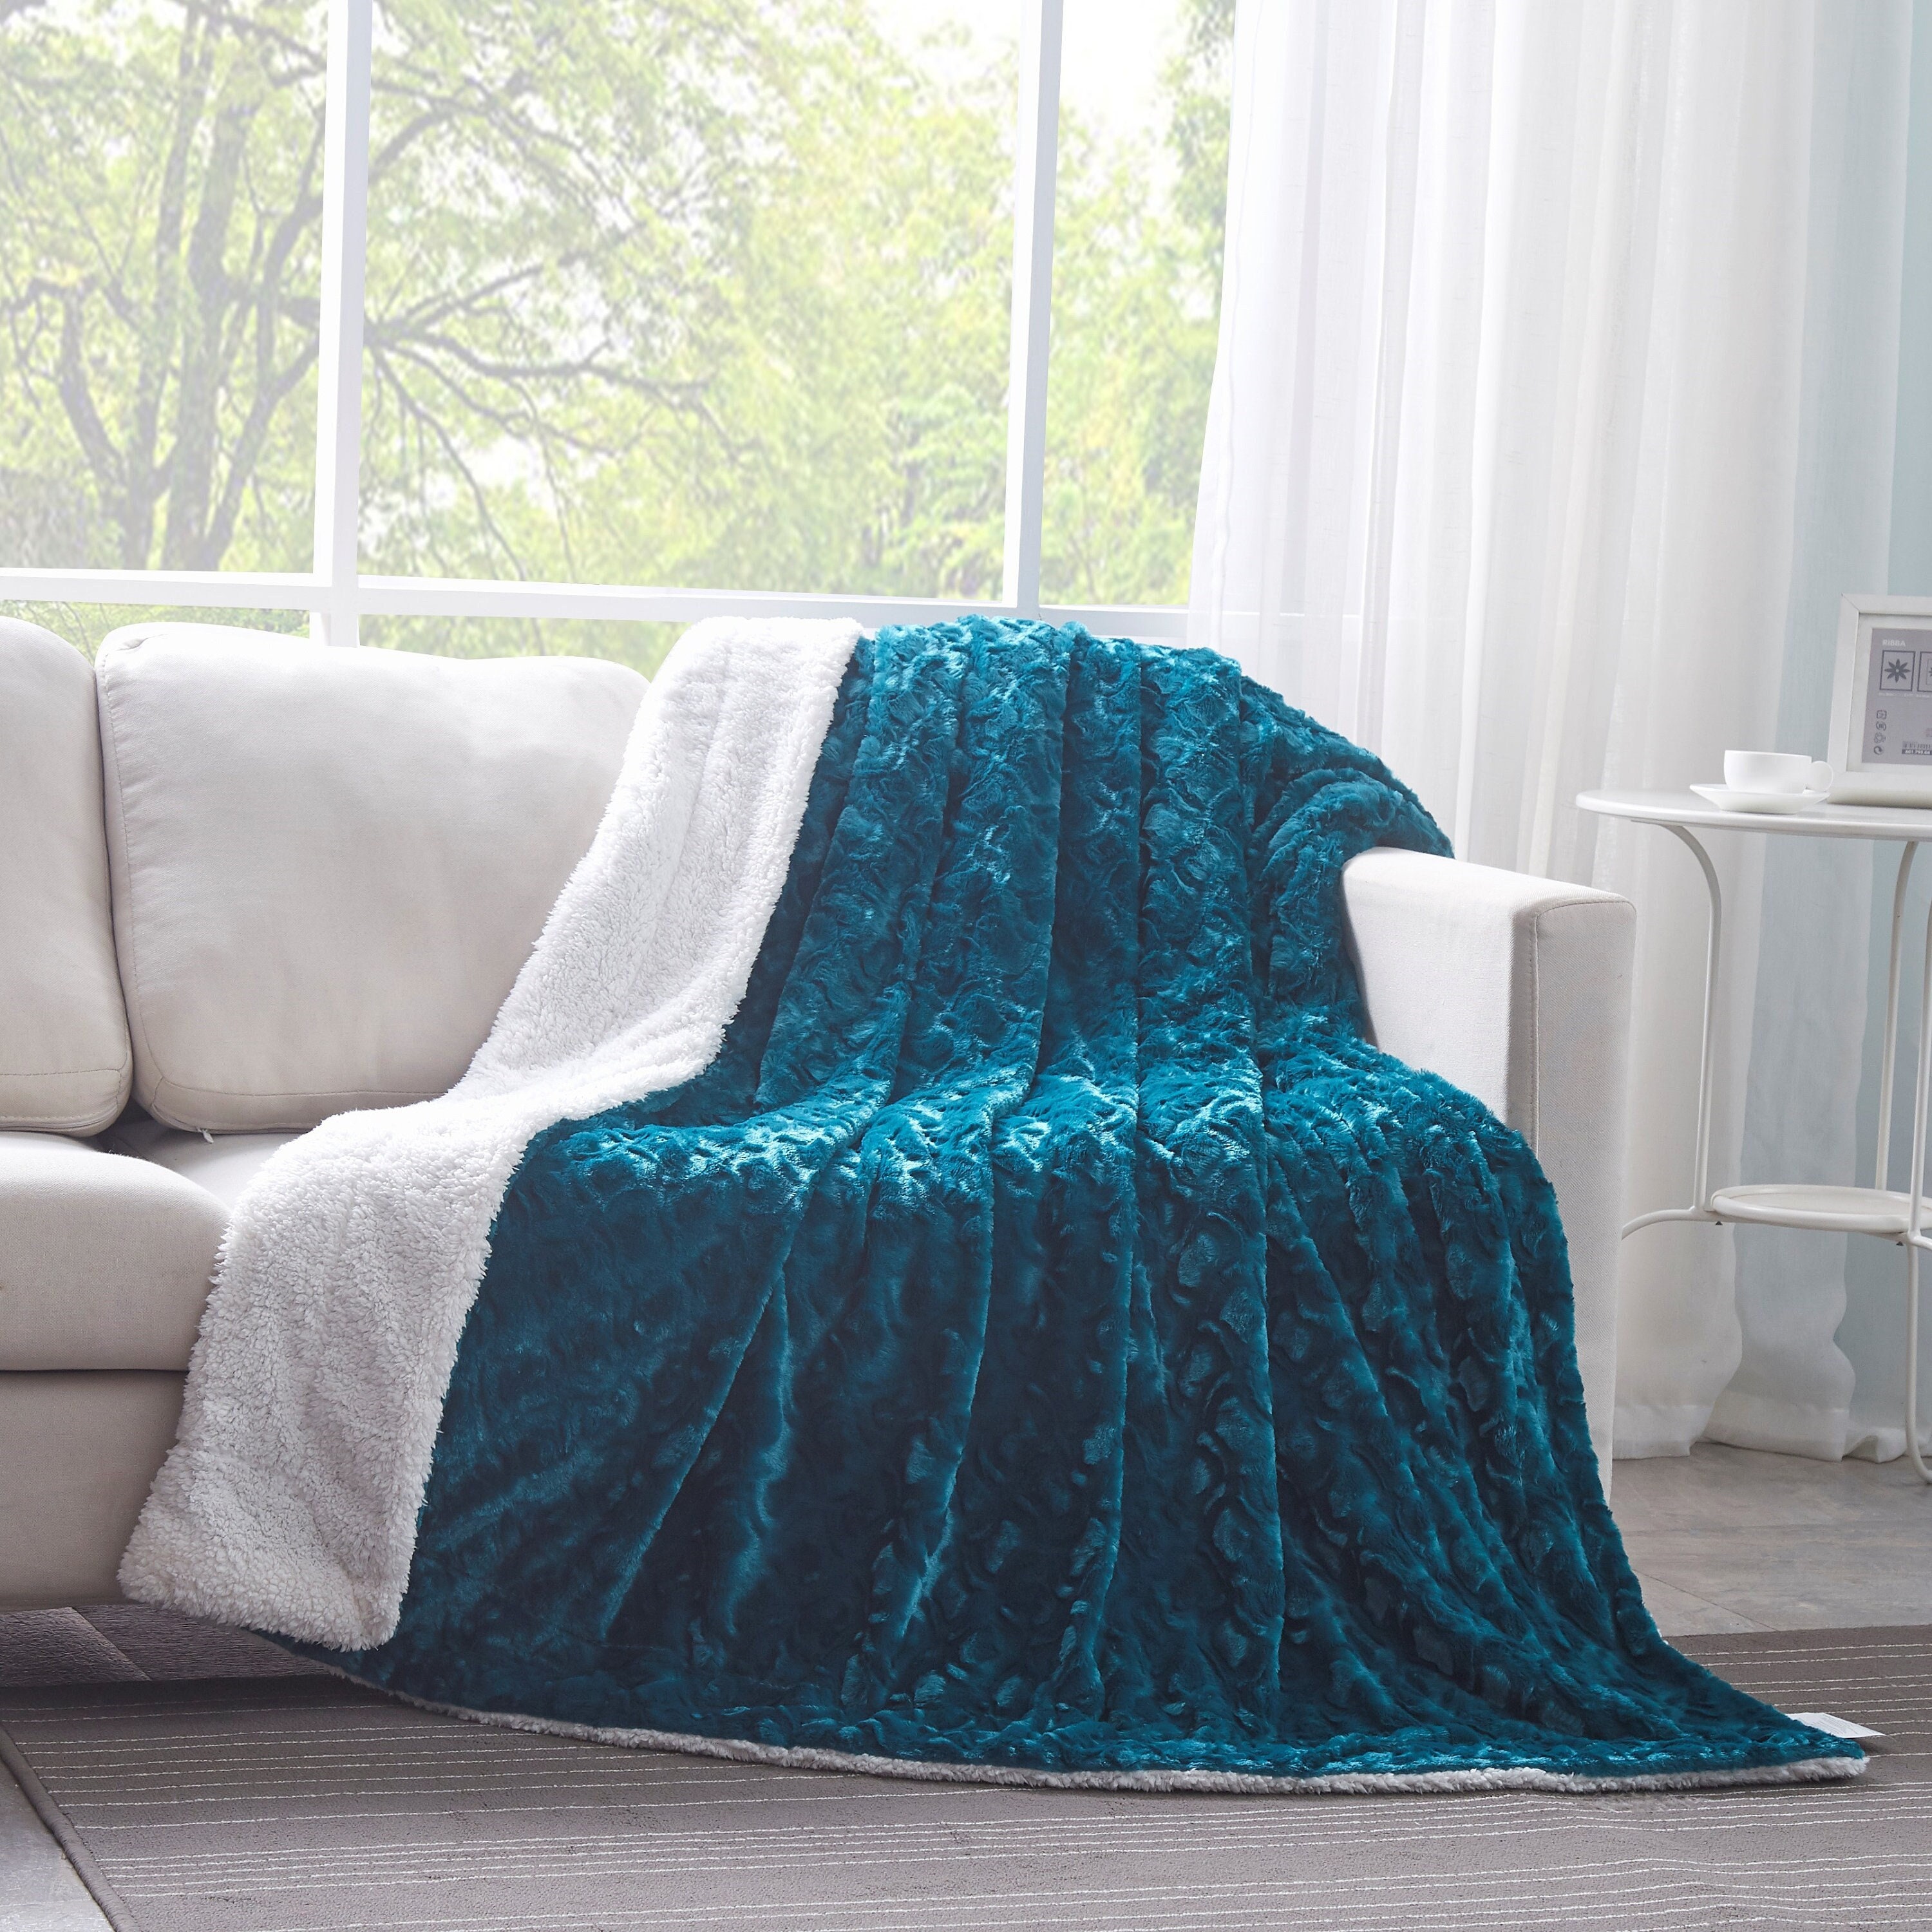 Vibrant Emerald Green Teal Blue Soft Faux Fur Throw Blanket - Etsy